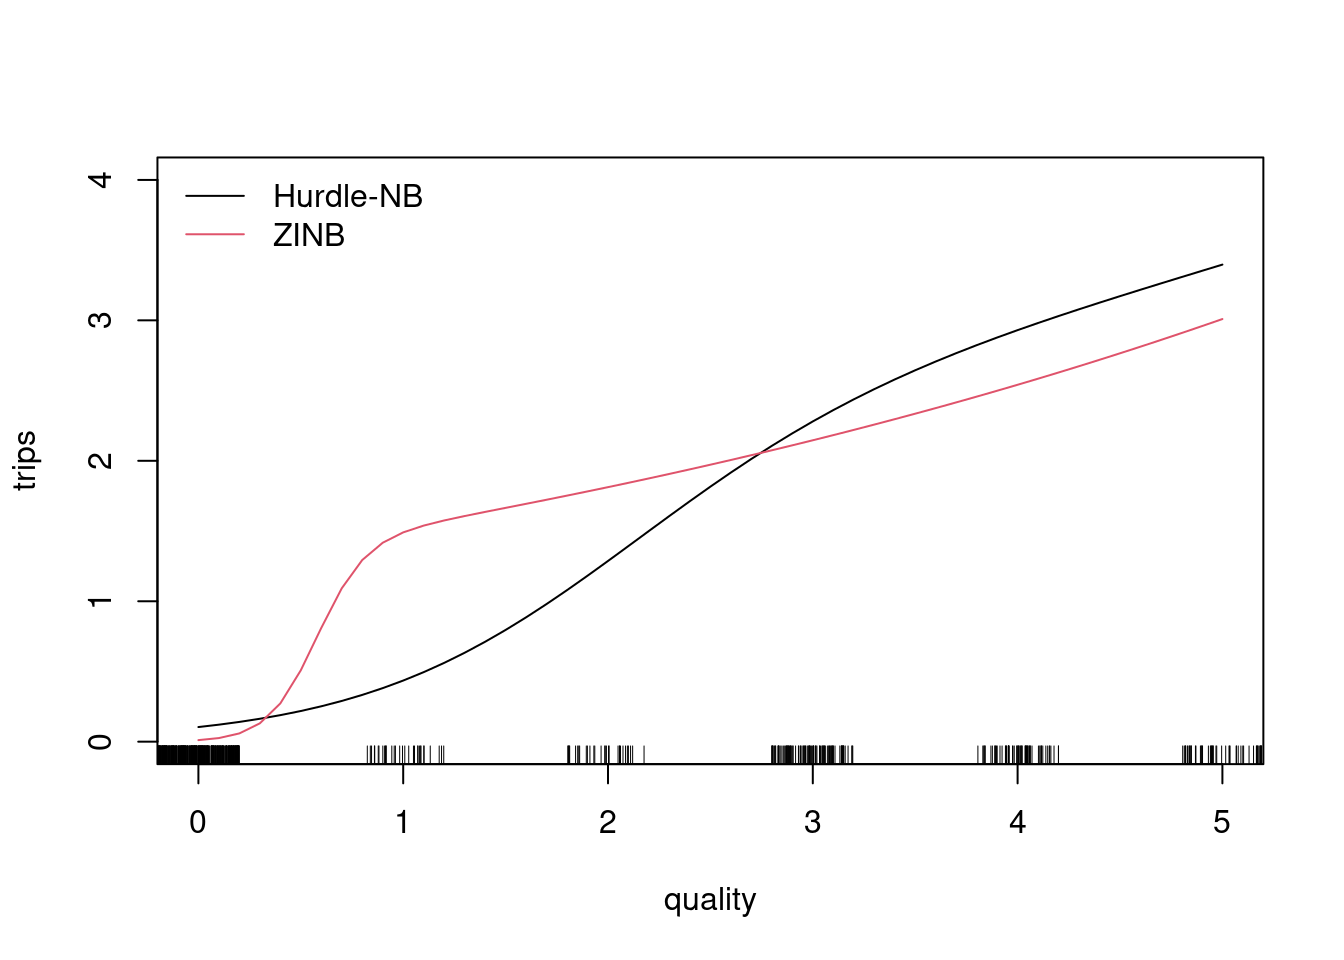 Effect of quality on trips: Hurdle and negative binomial model